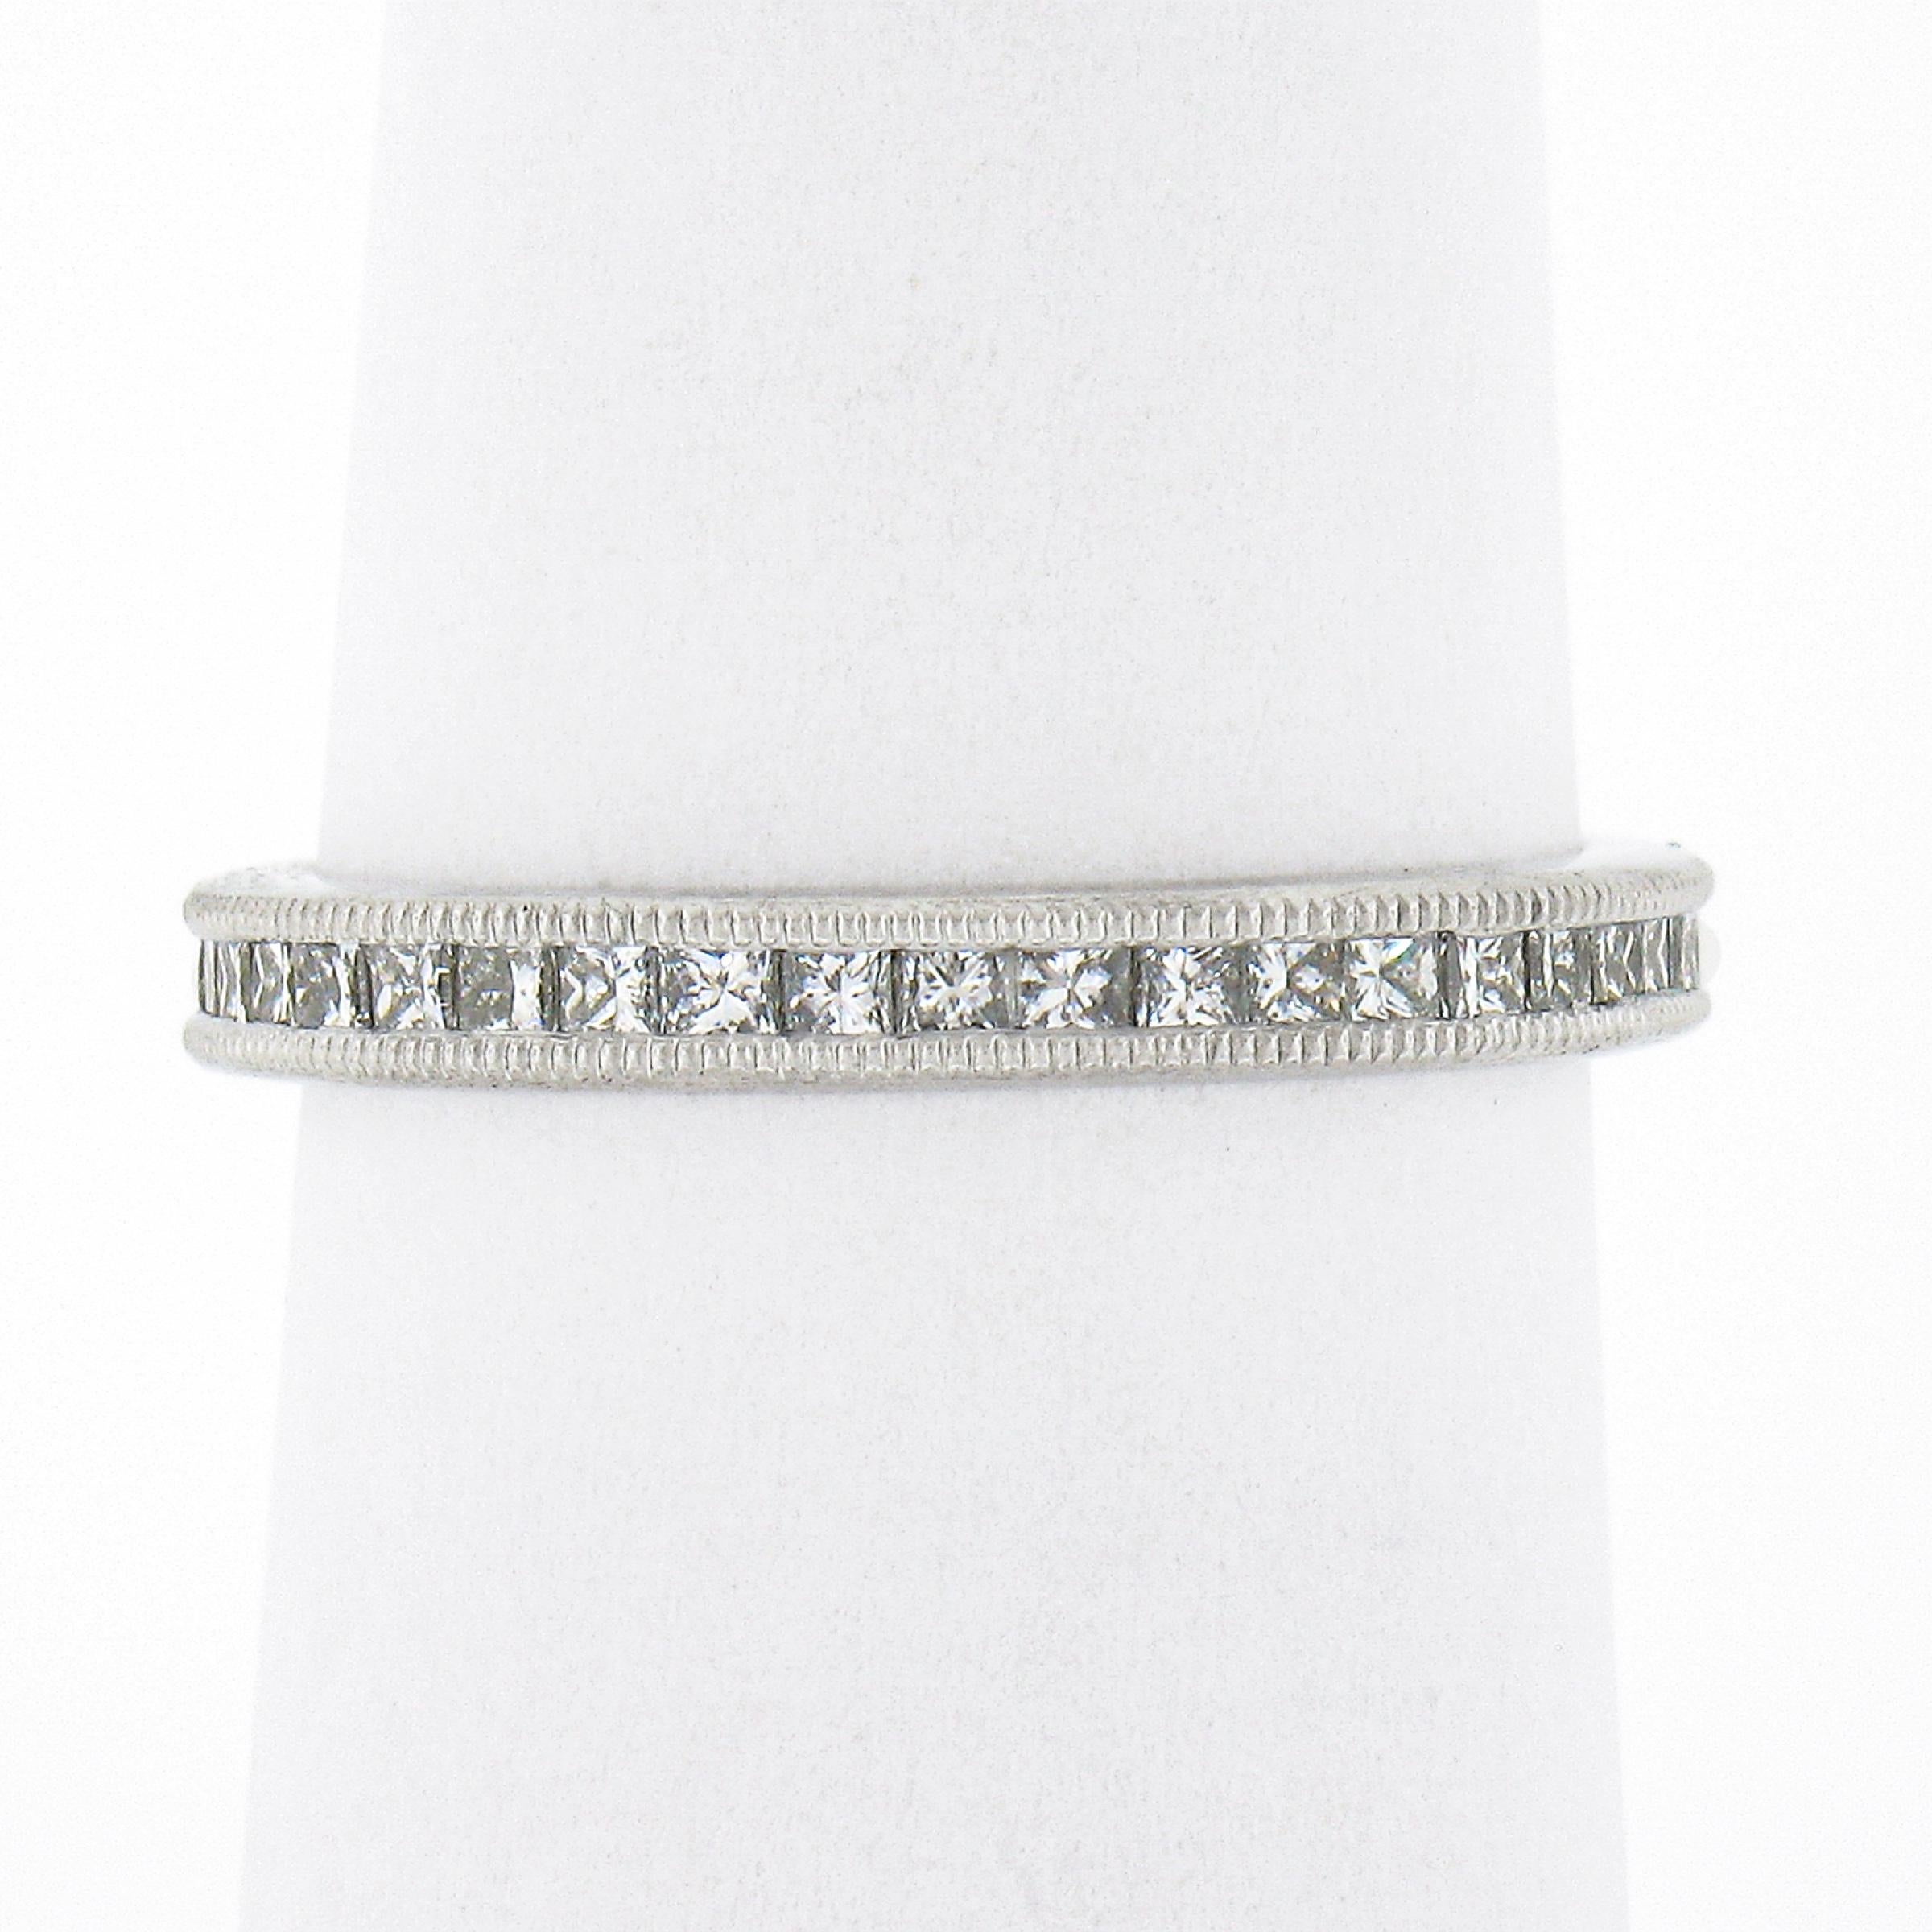 This gorgeous diamond eternity band ring was crafted from solid platinum and features a simple channel setting that carries 40 princess cut diamonds throughout the entire band. These SUPER FINE quality diamonds show incredible brilliance with super